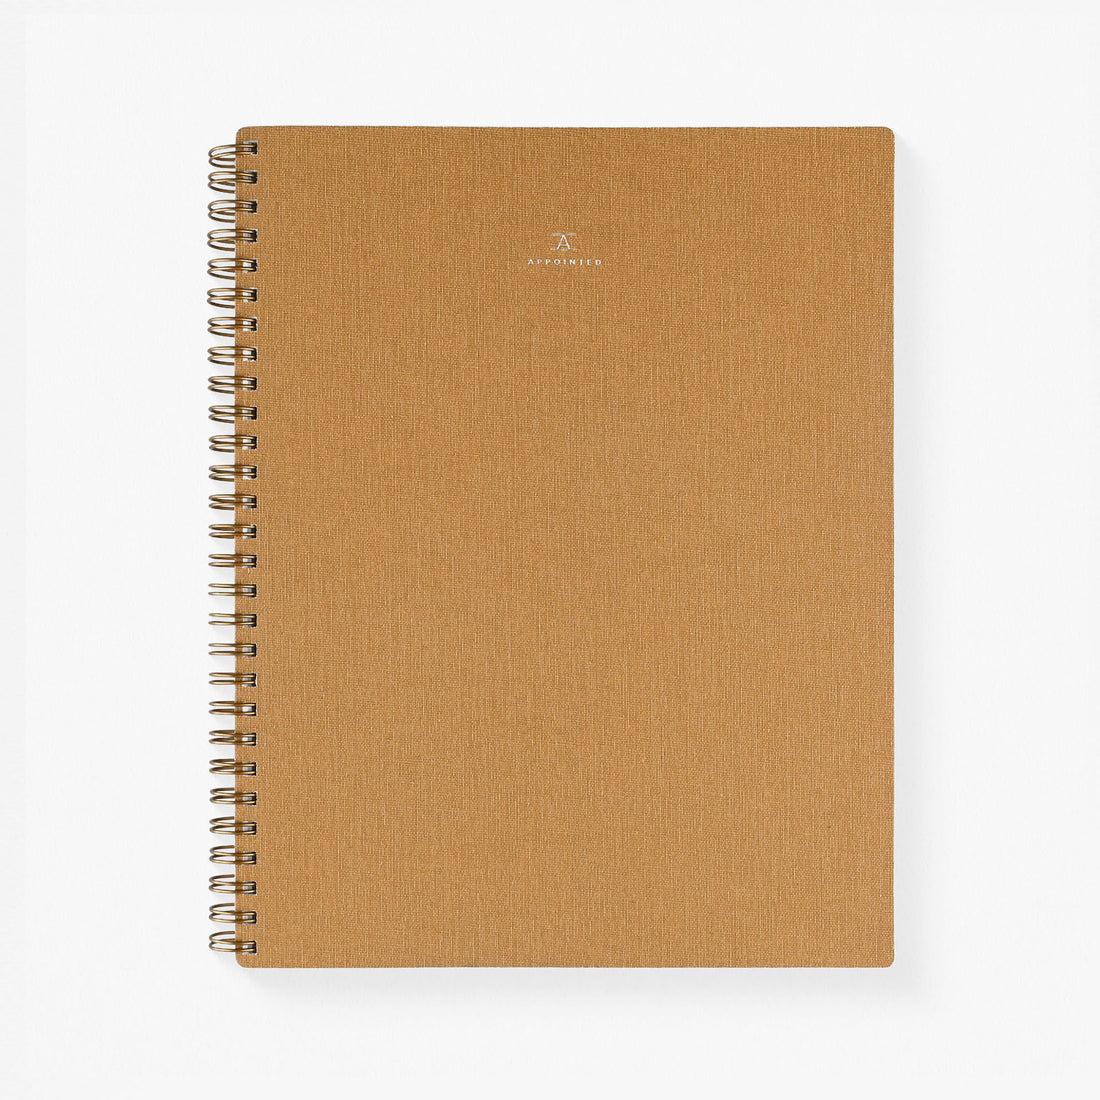 Appointed Teak Notebook Lined Limited Edition 